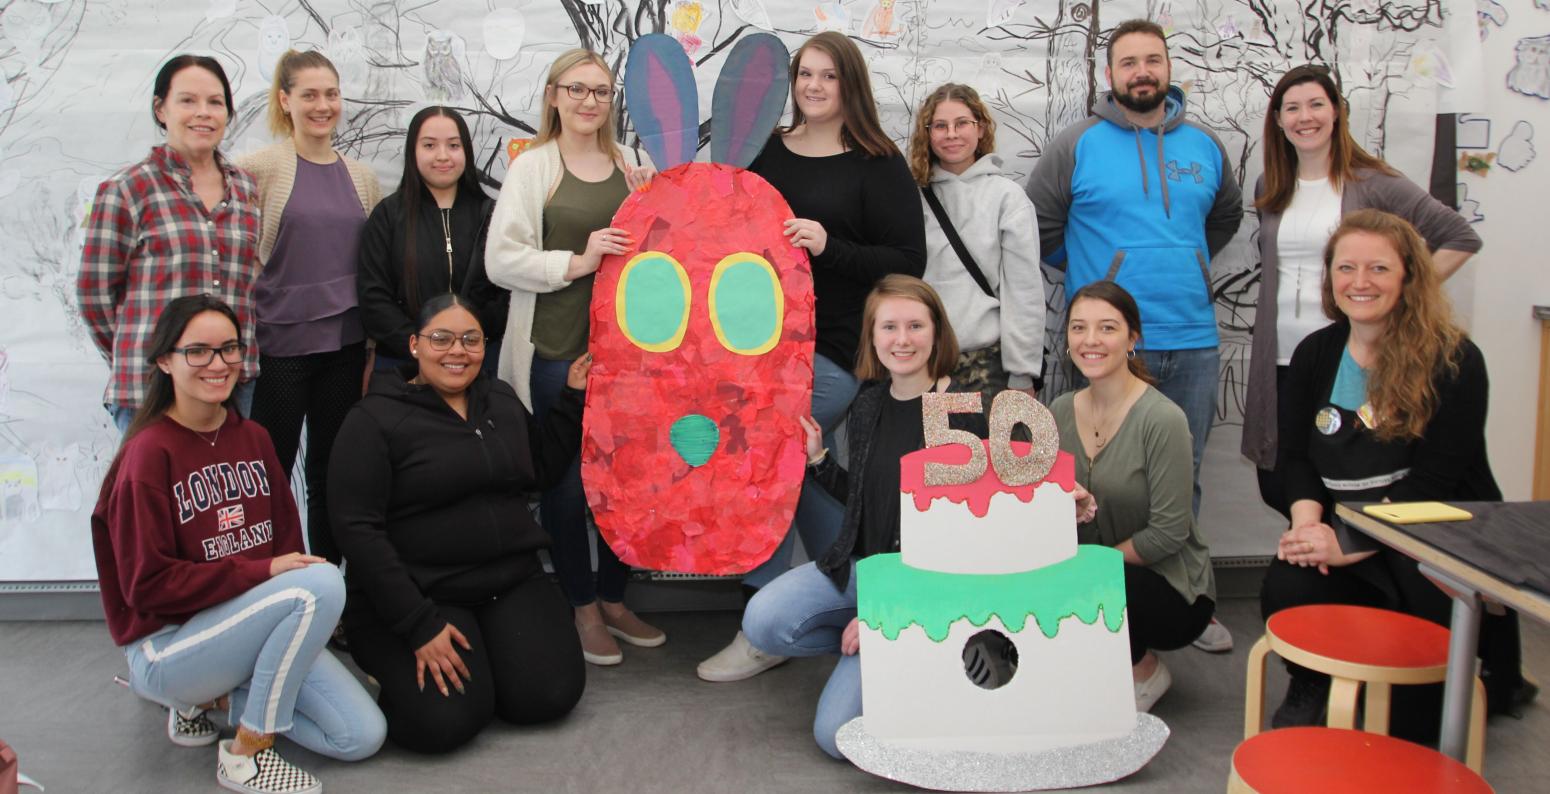 A group of HCC students and educators holding a 50th birthday cake and caterpillar head both made from cardboard and paper.